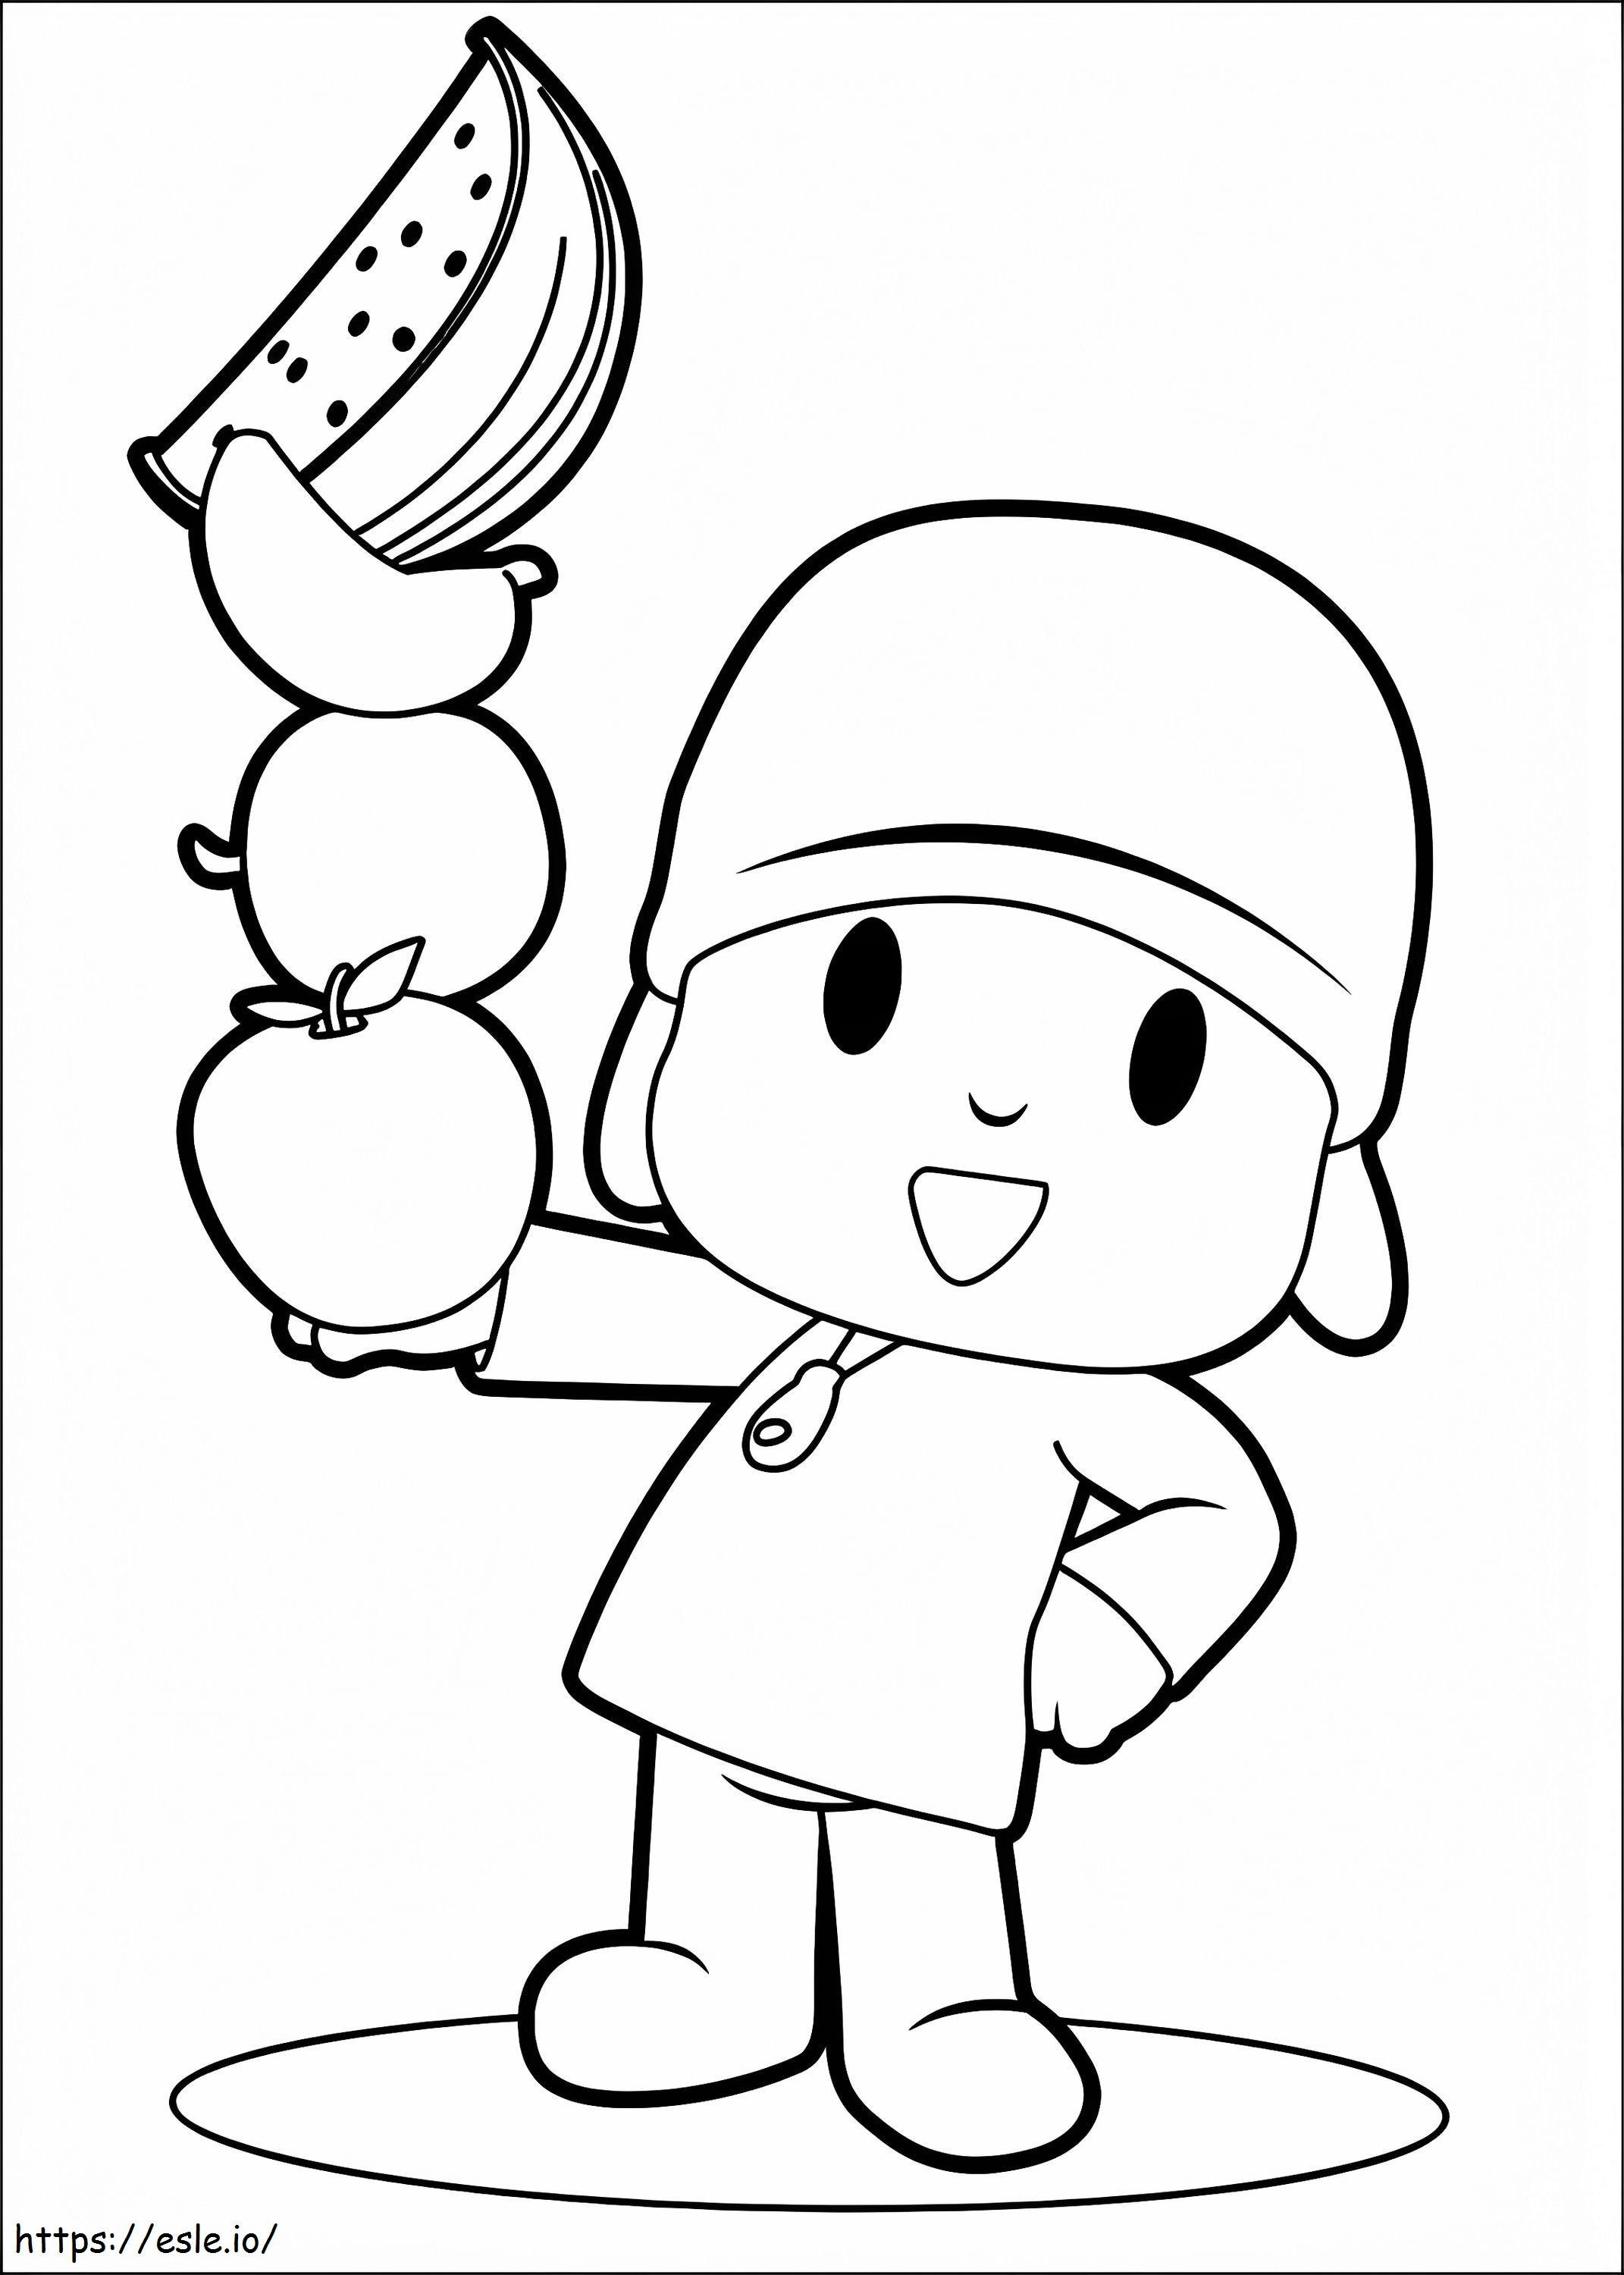 Pocoyo Holding Fruit coloring page